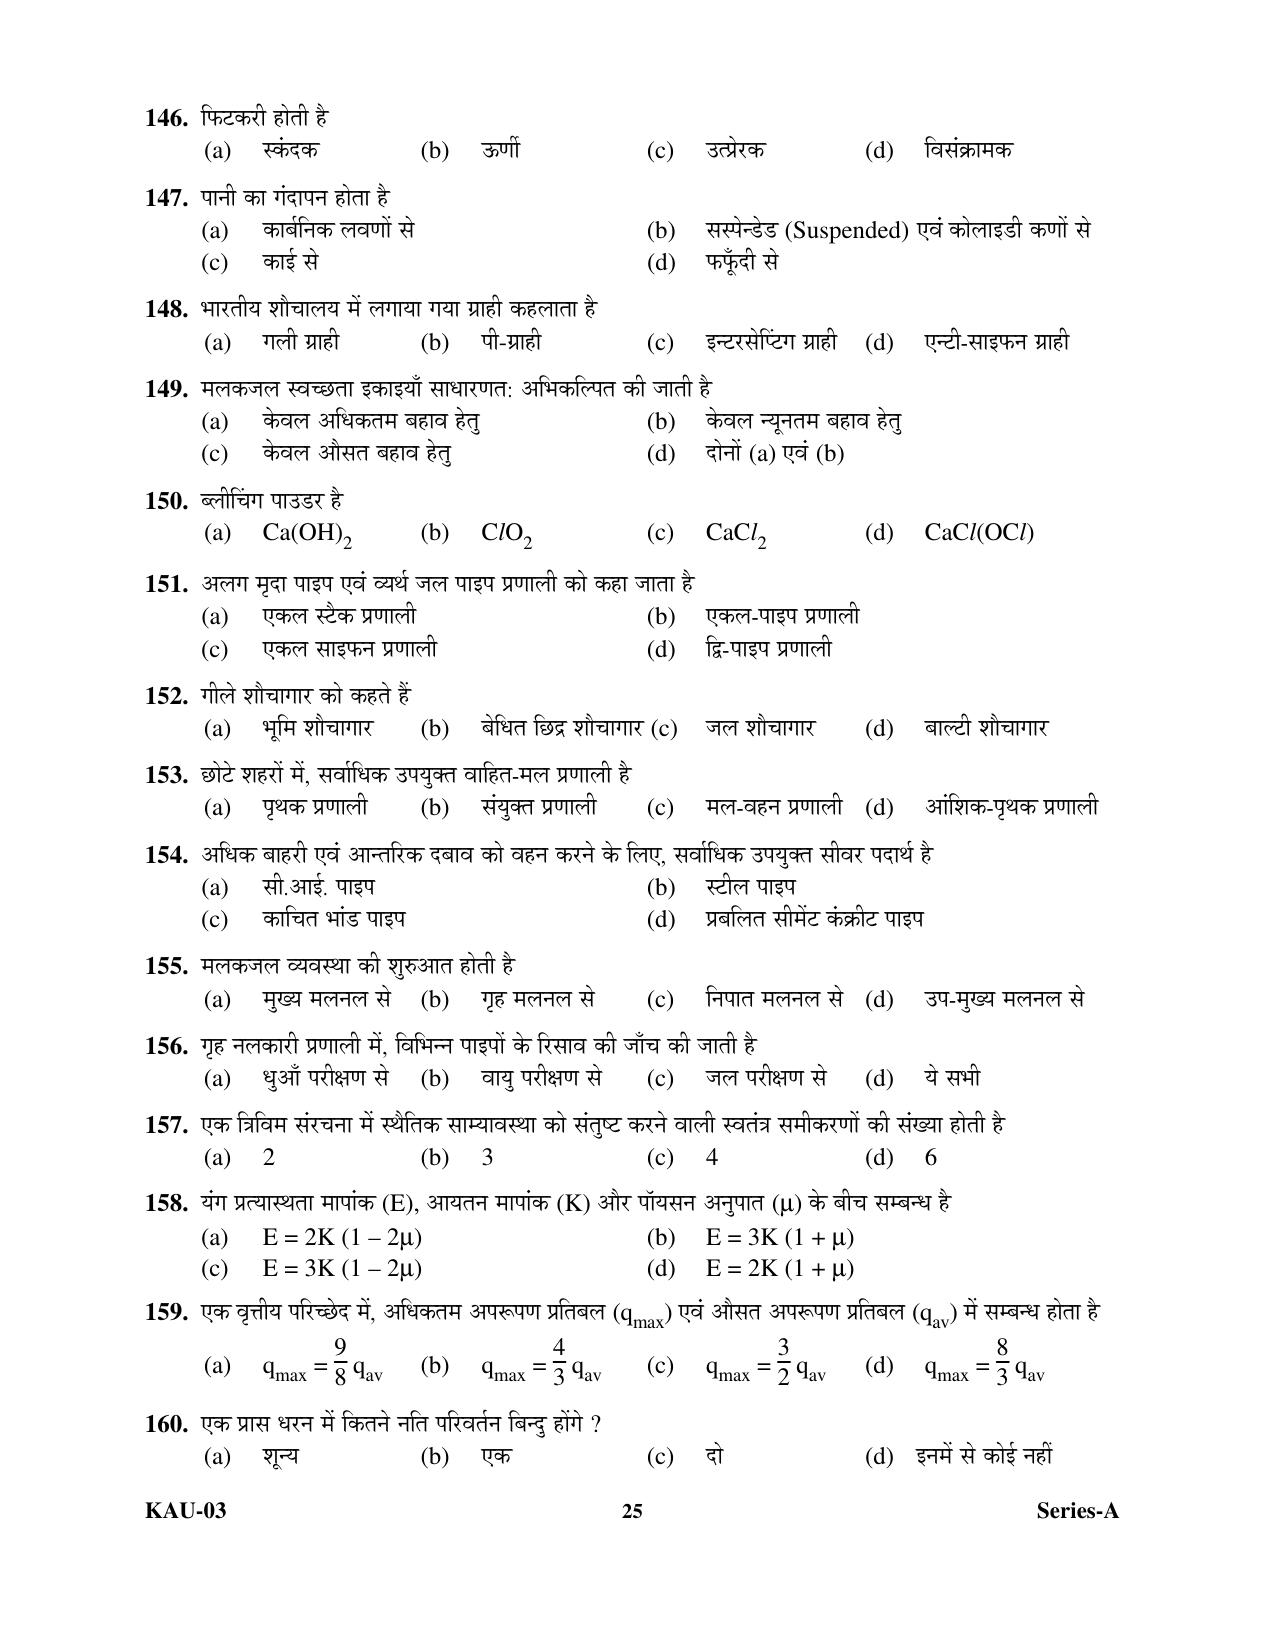 SEBI Officer Civil Engineering Previous Paper - Page 24